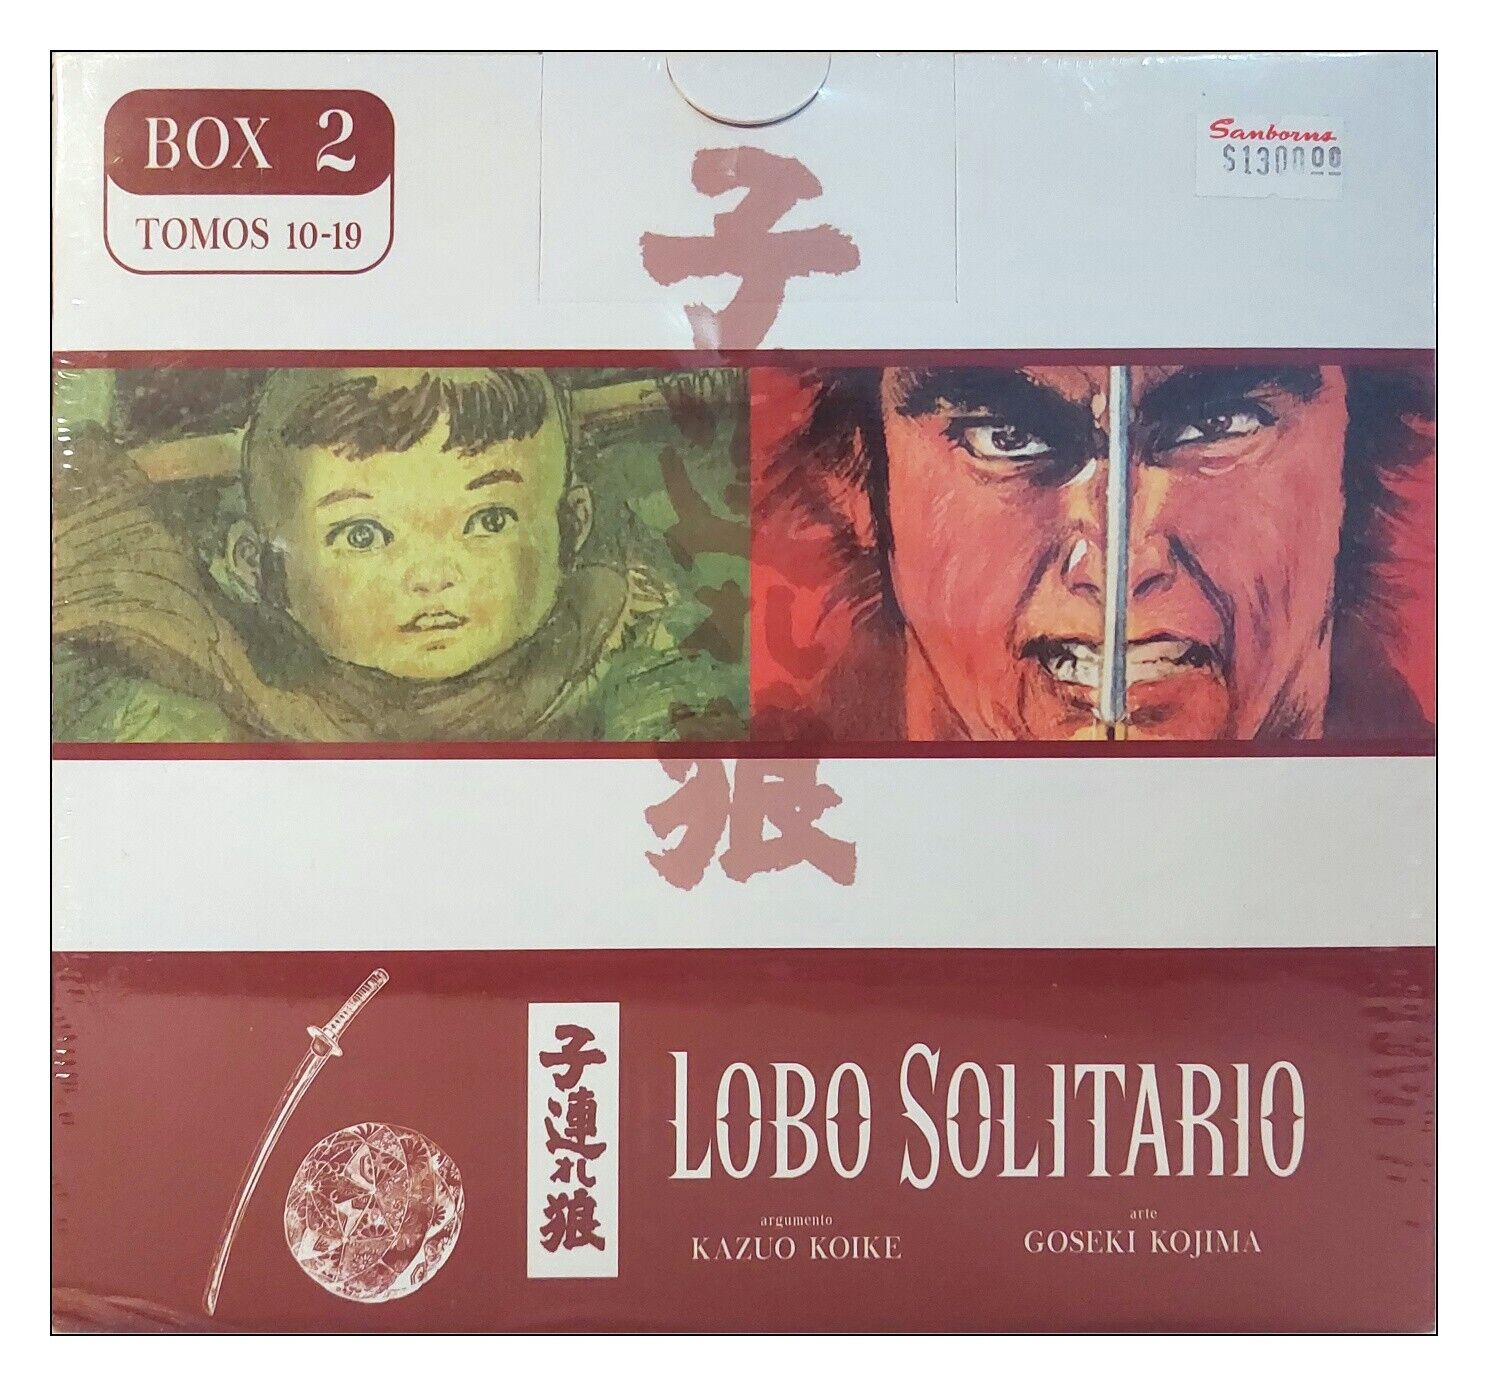 Lone Wolf and Cub manga box set #2 volumes 10-19 in Spanish by Panini Mexico